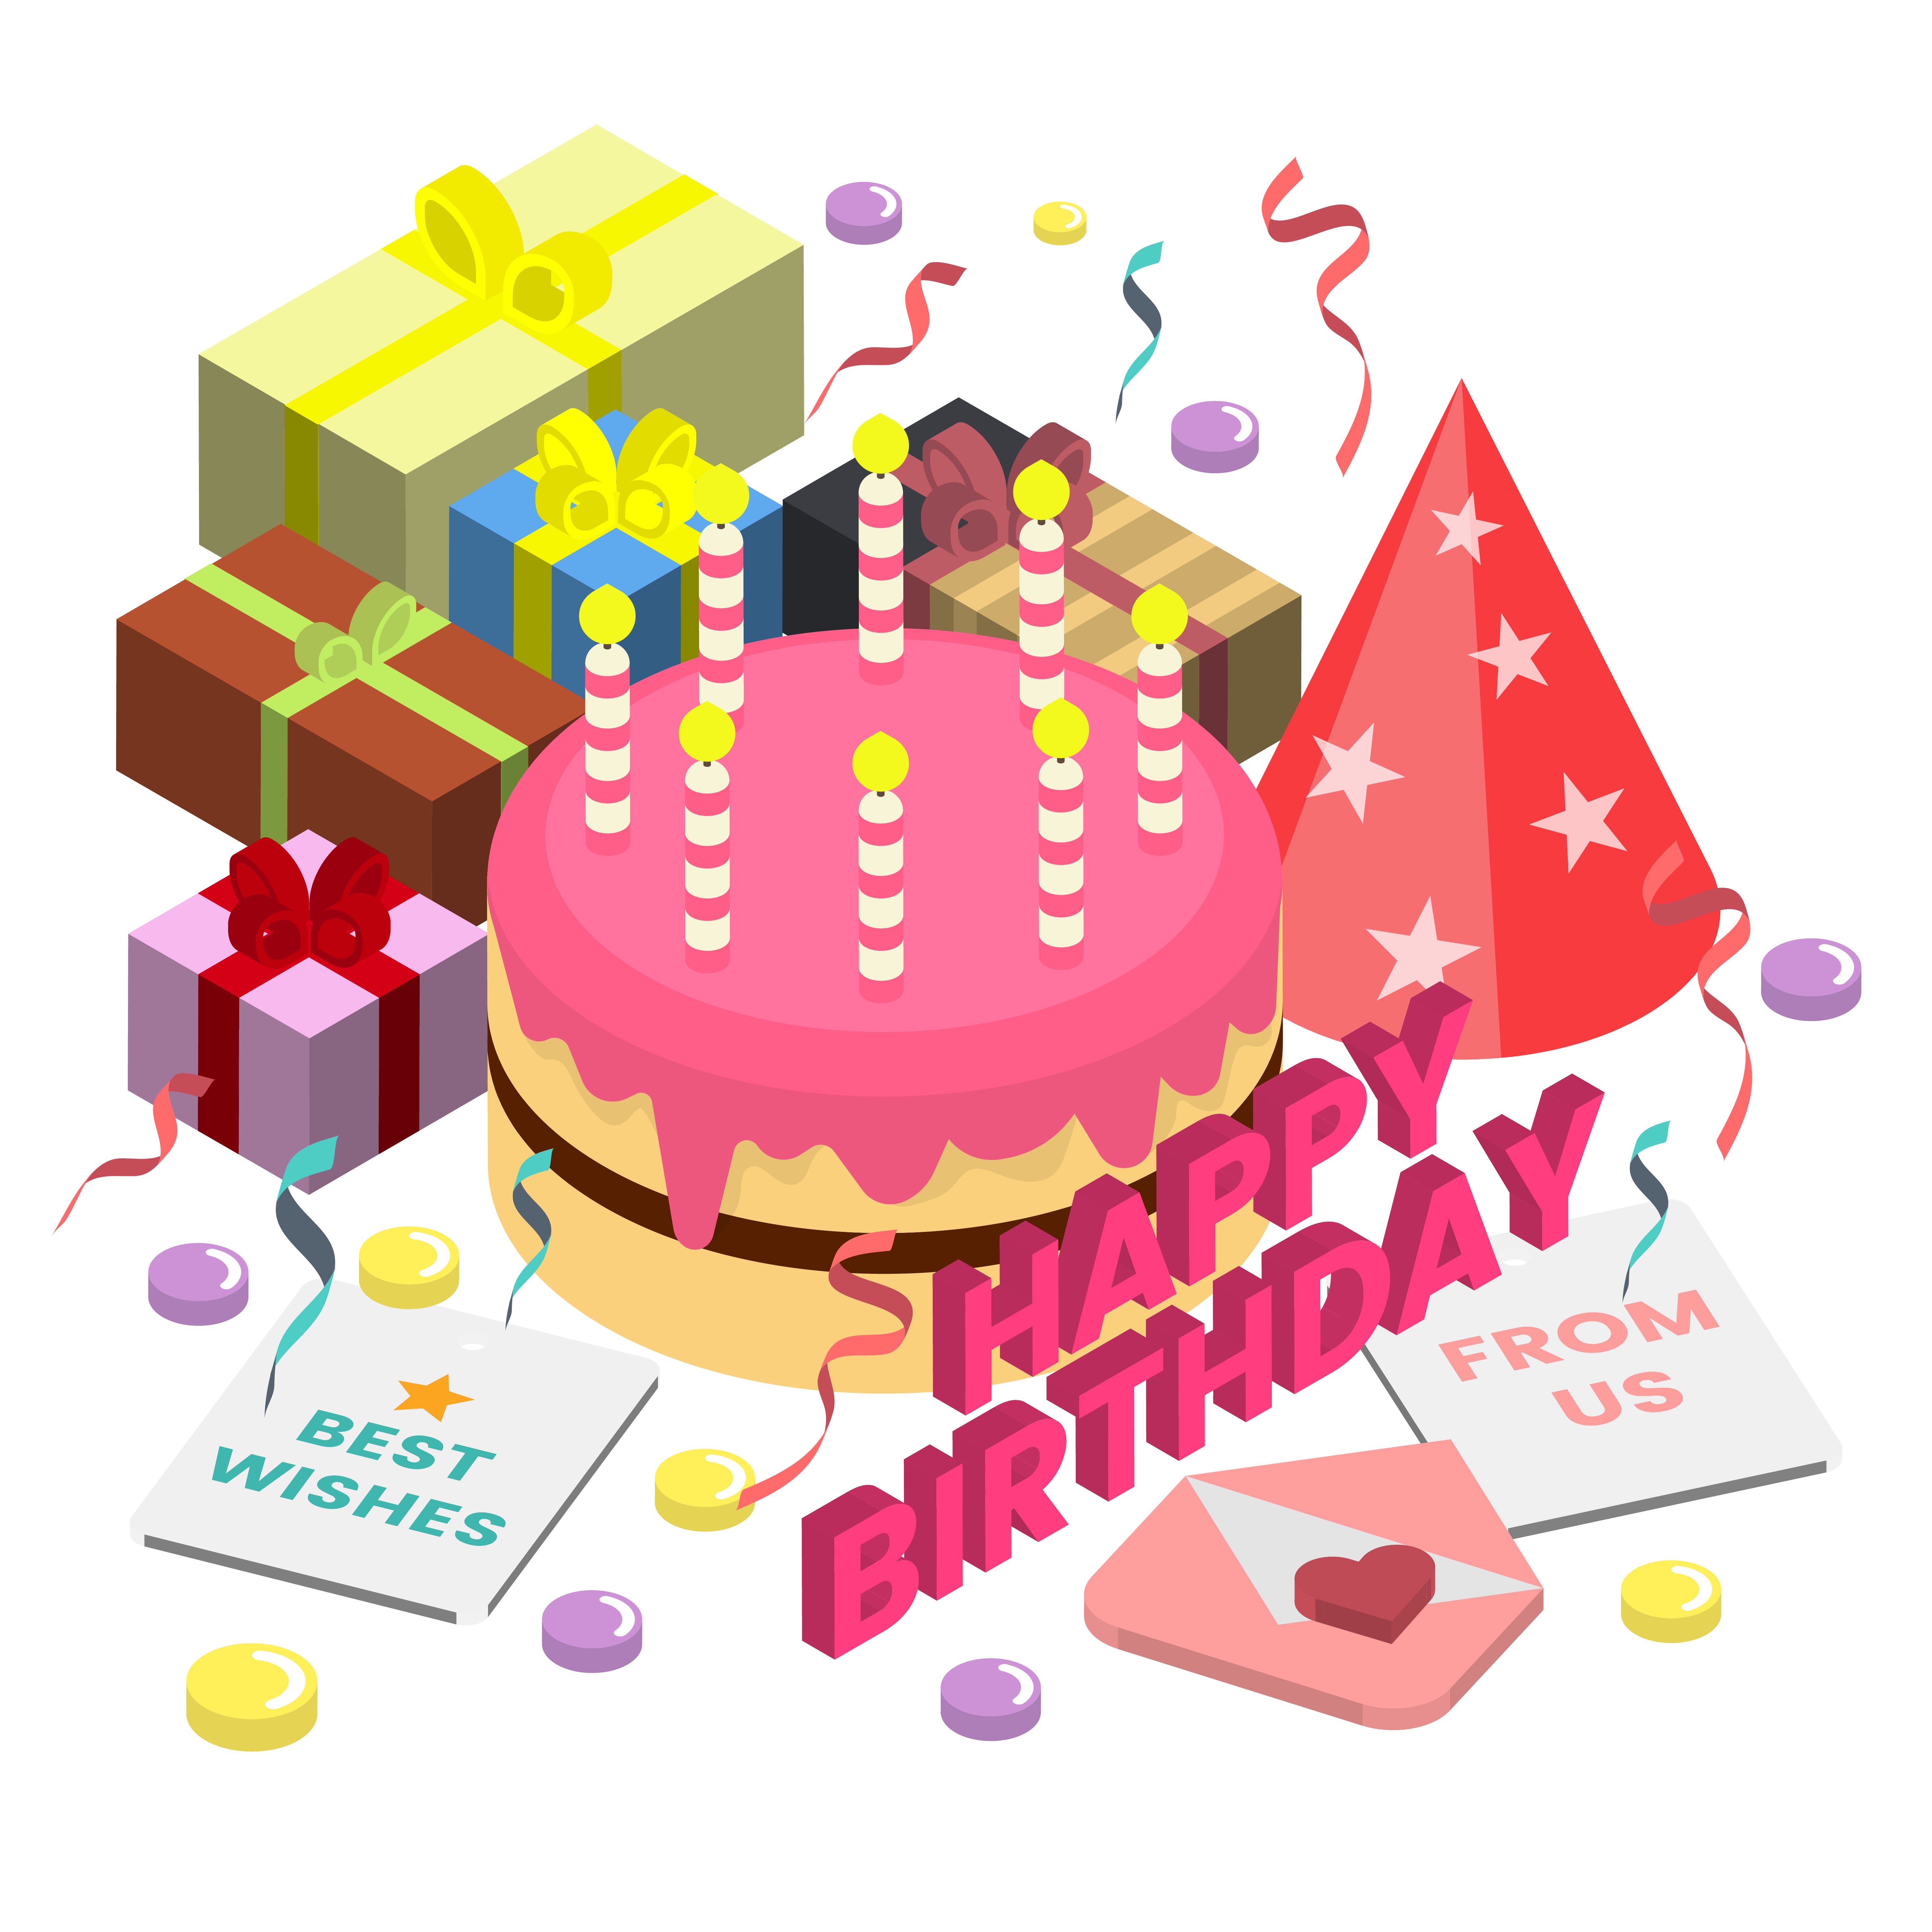 Download Happy Birthday Vector Logo for banner - Download Free ...